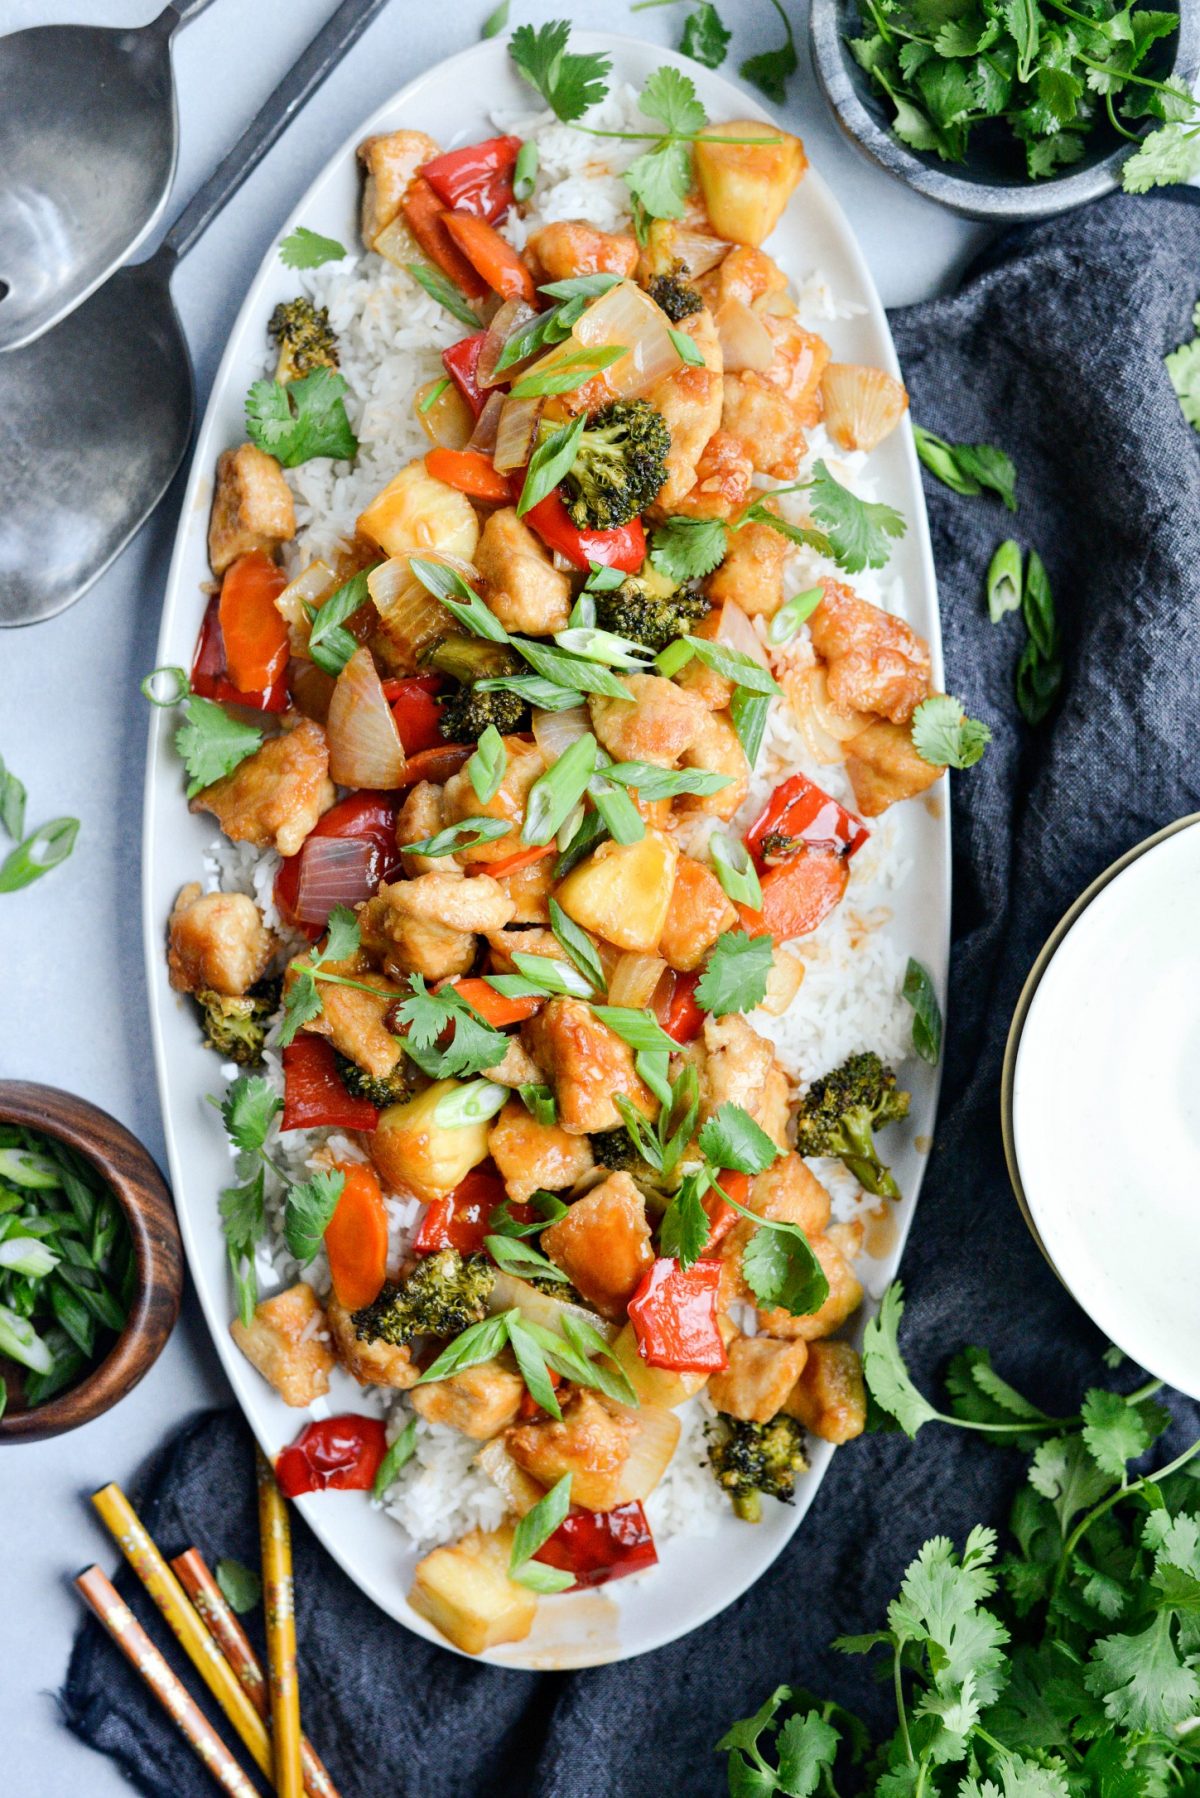 Large platter of Homemade Sweet and Sour Chicken served over rice.